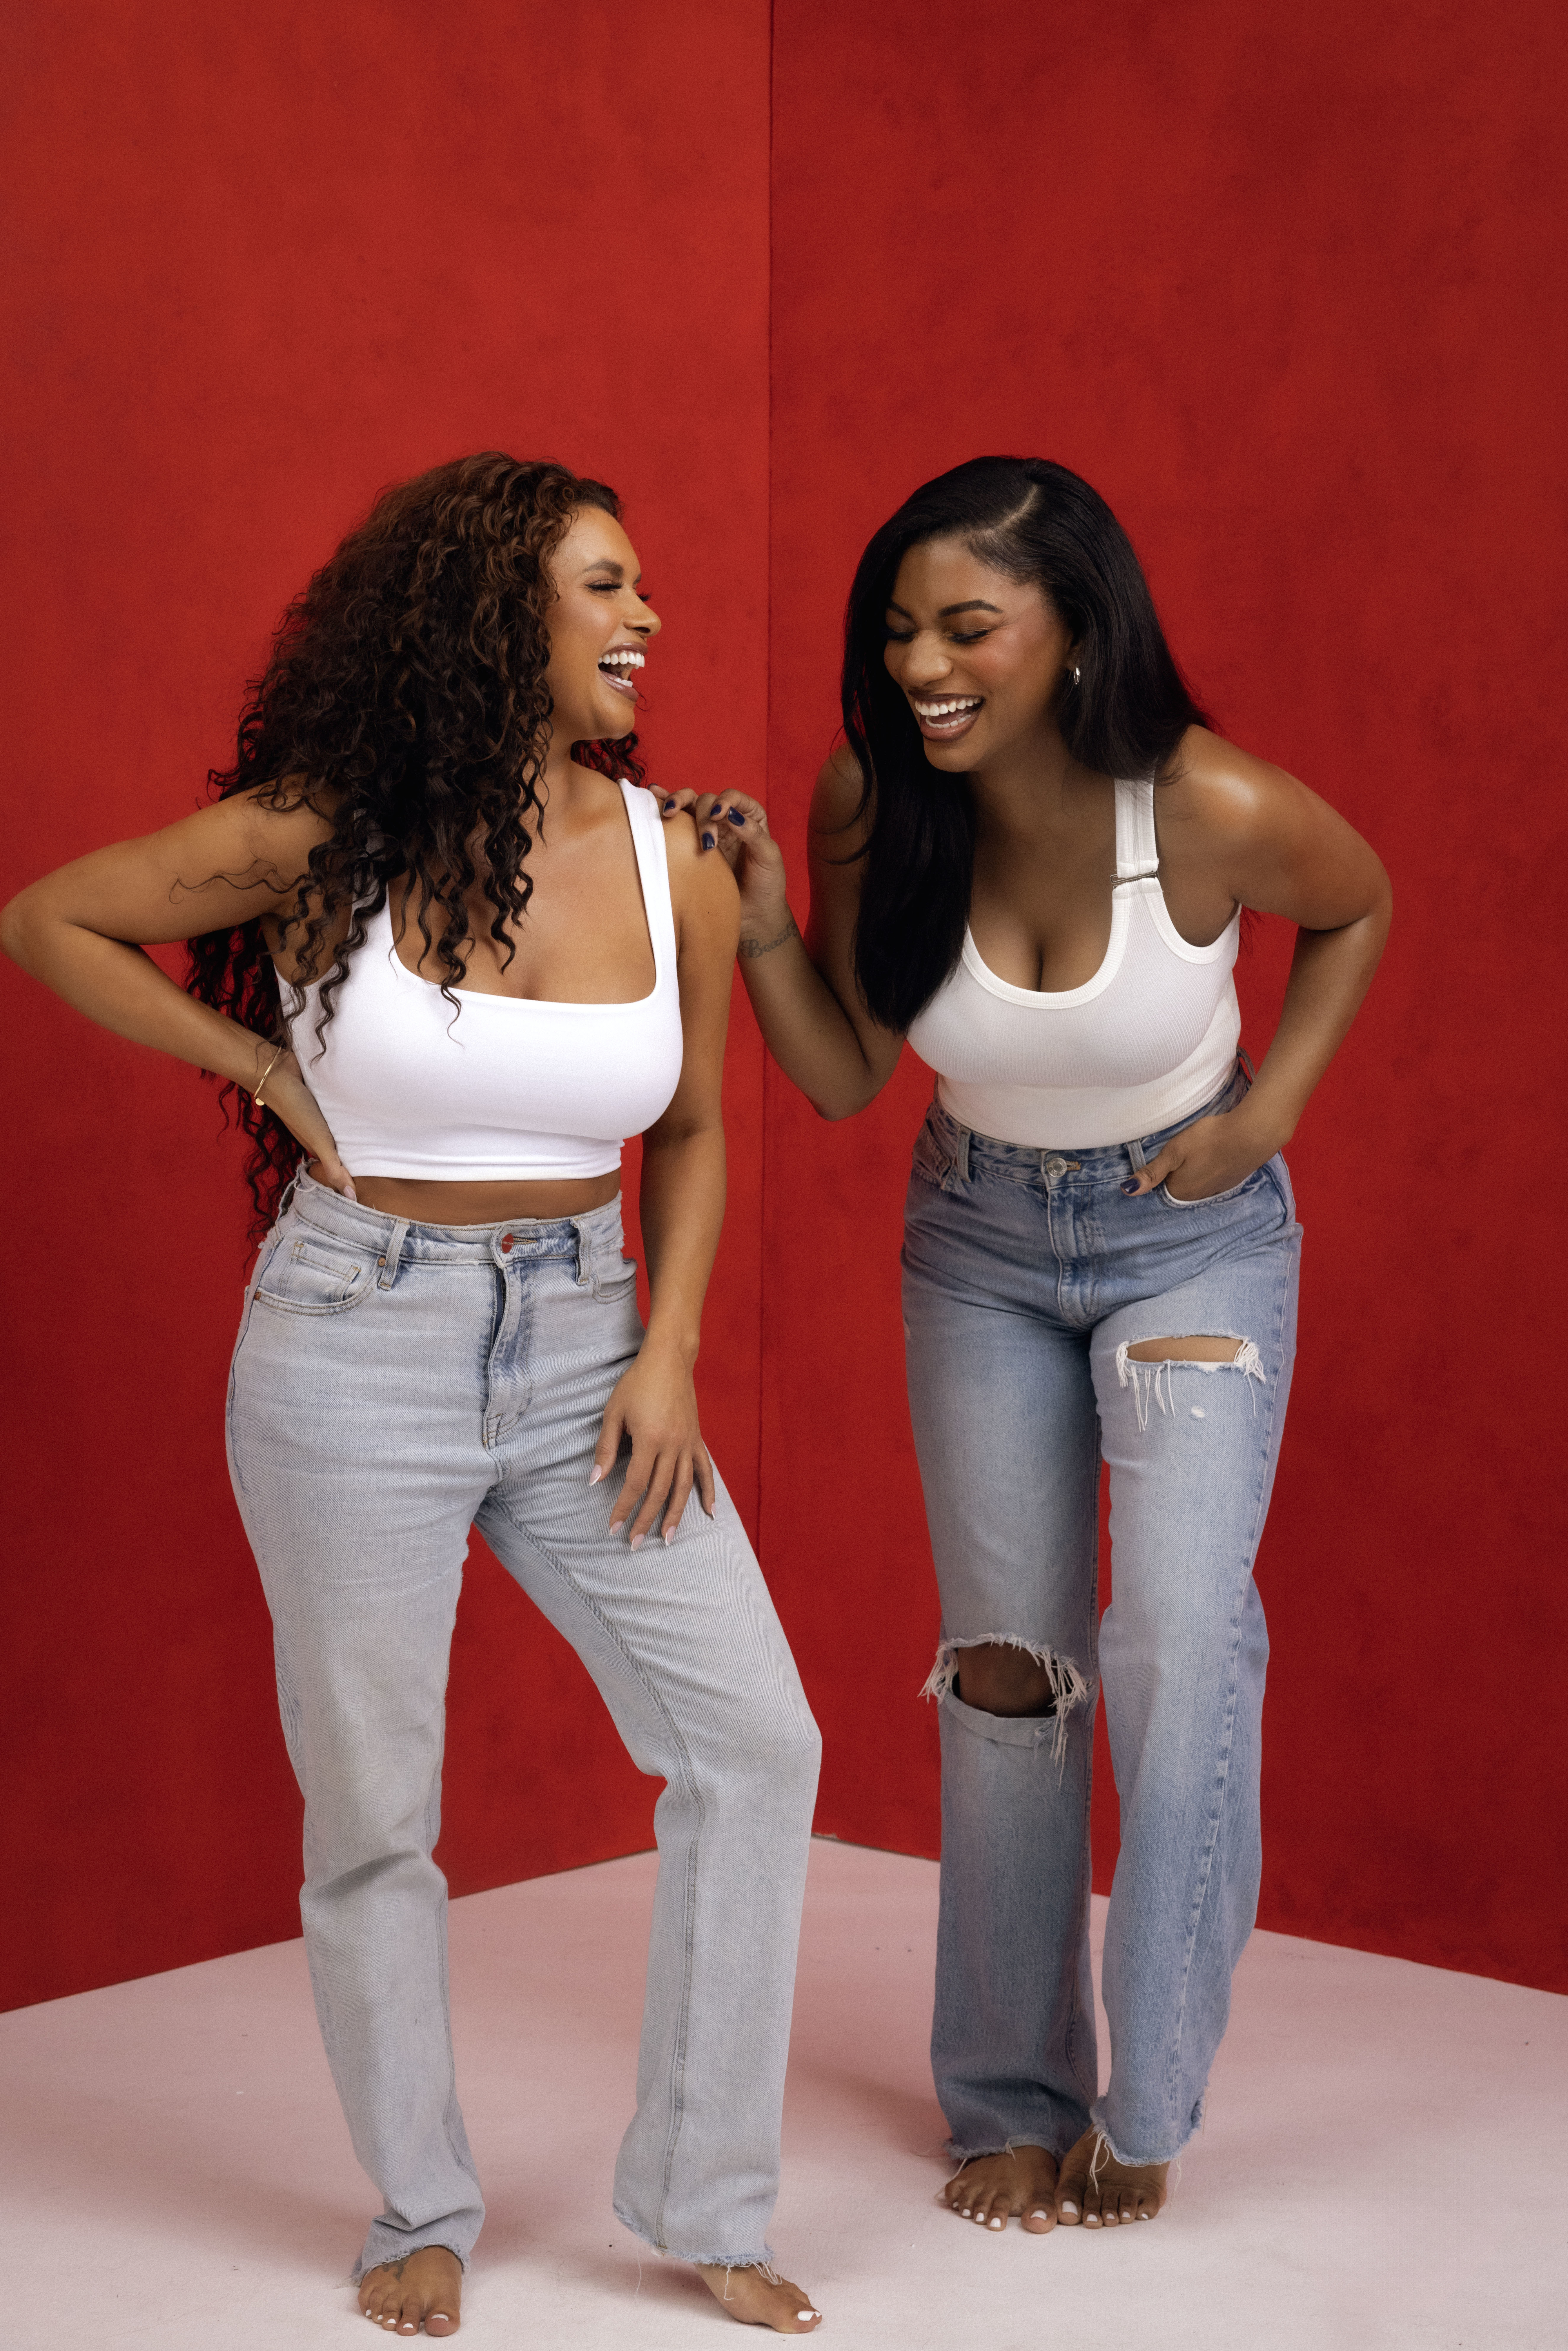 Two women in white tops and jeans smiling and posing playfully against a red backdrop